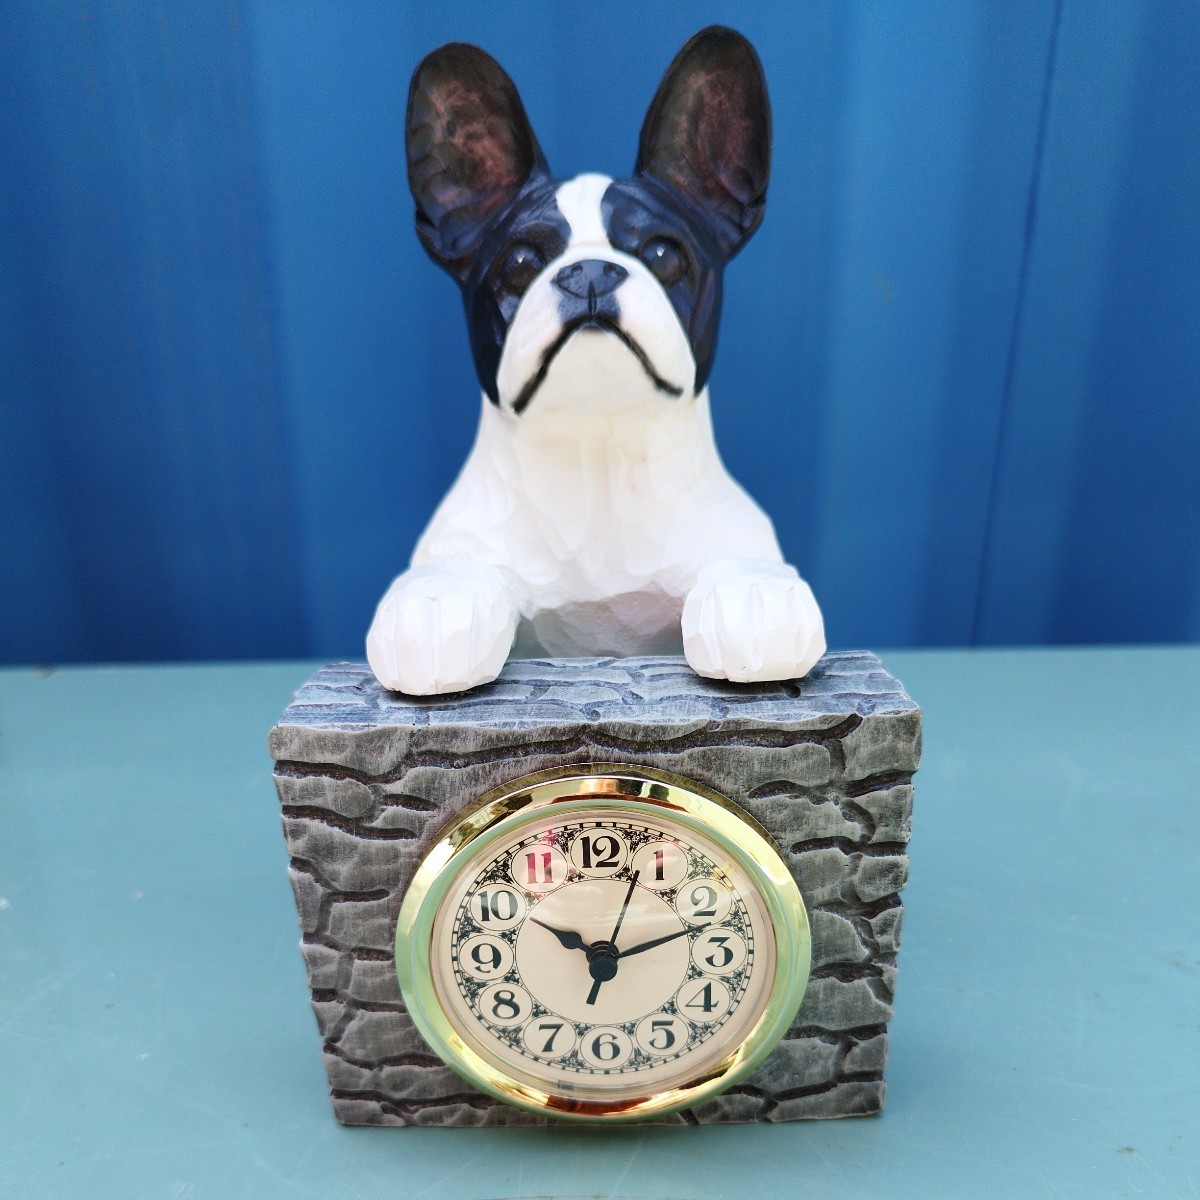 French Bulldog Goods Handmade from USA Table Clock Pied Working Condition New Old Stock Limited to 1 item Clearance Sale, Hobby, Culture, Handcraft, Handicrafts, others